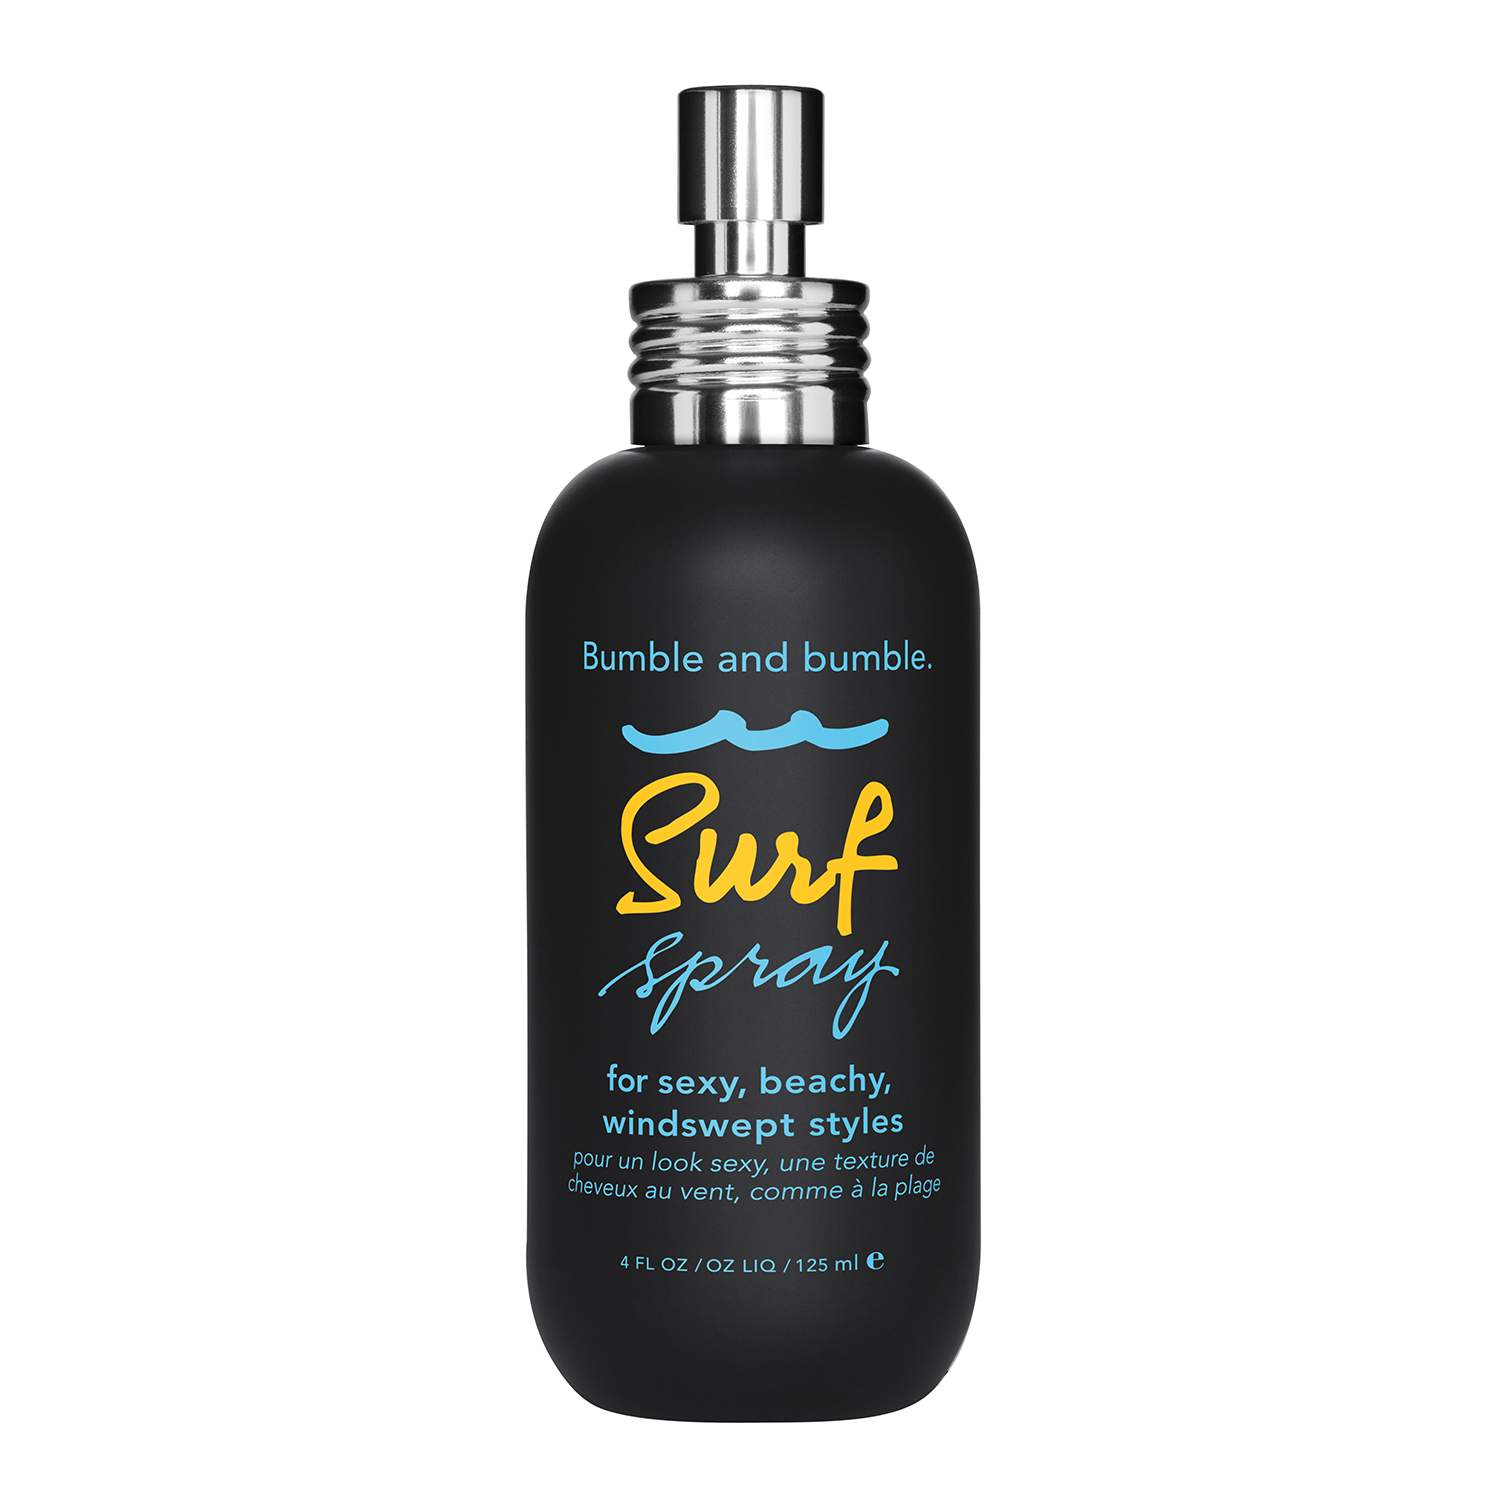 Bumble and bumble. Surf Spray  1